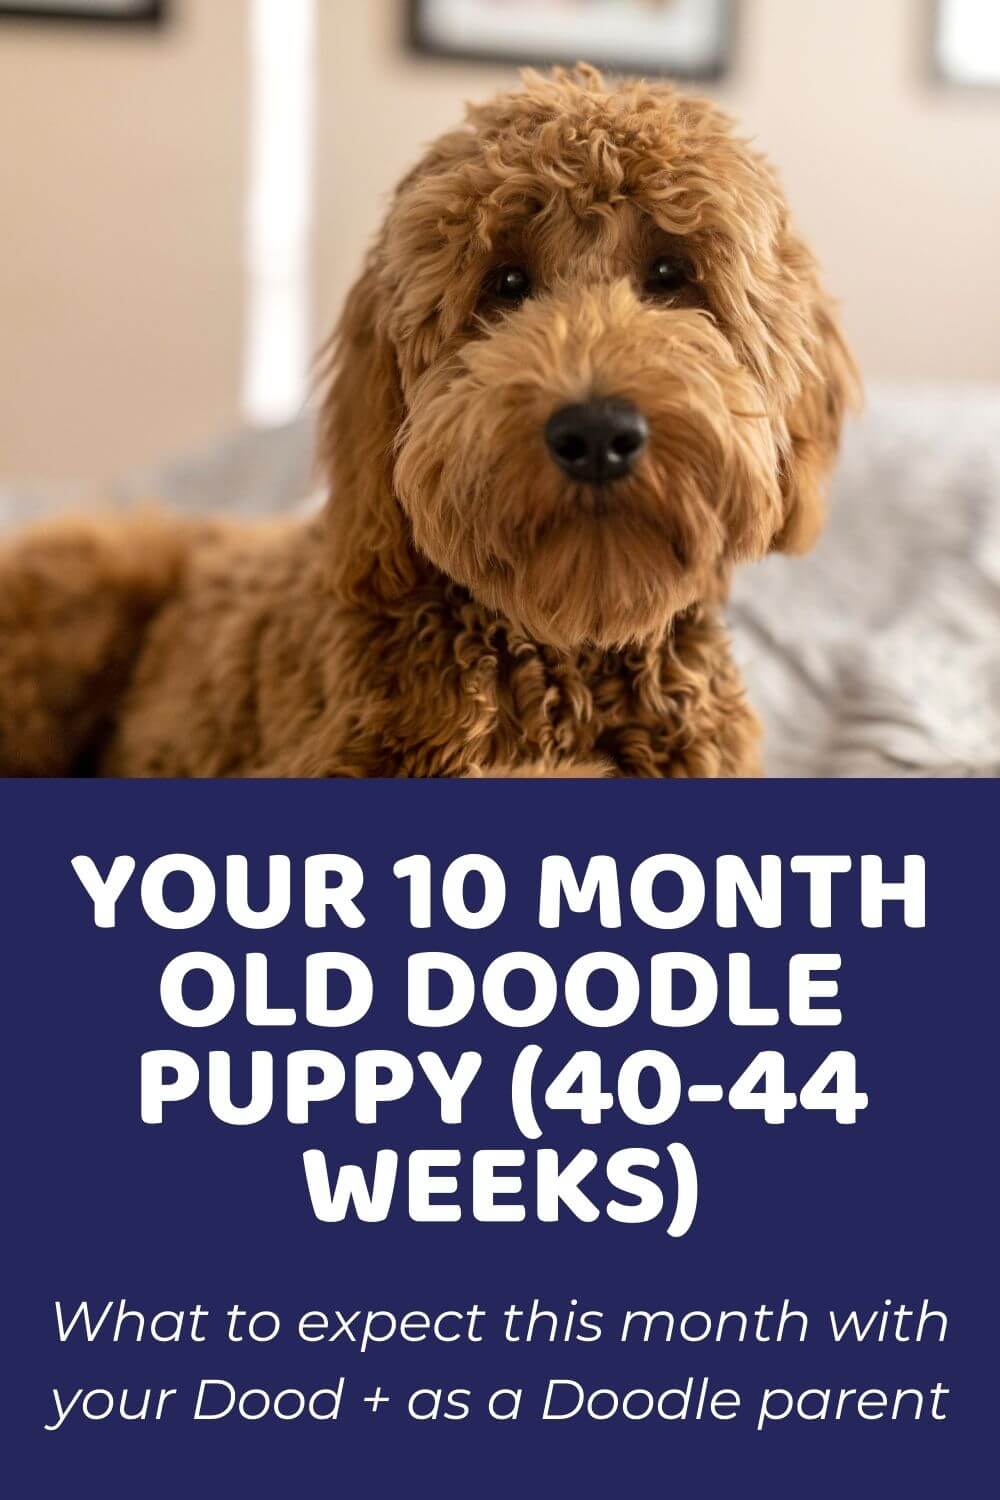 Your 10 Month Old Doodle Puppy (40-44 weeks)